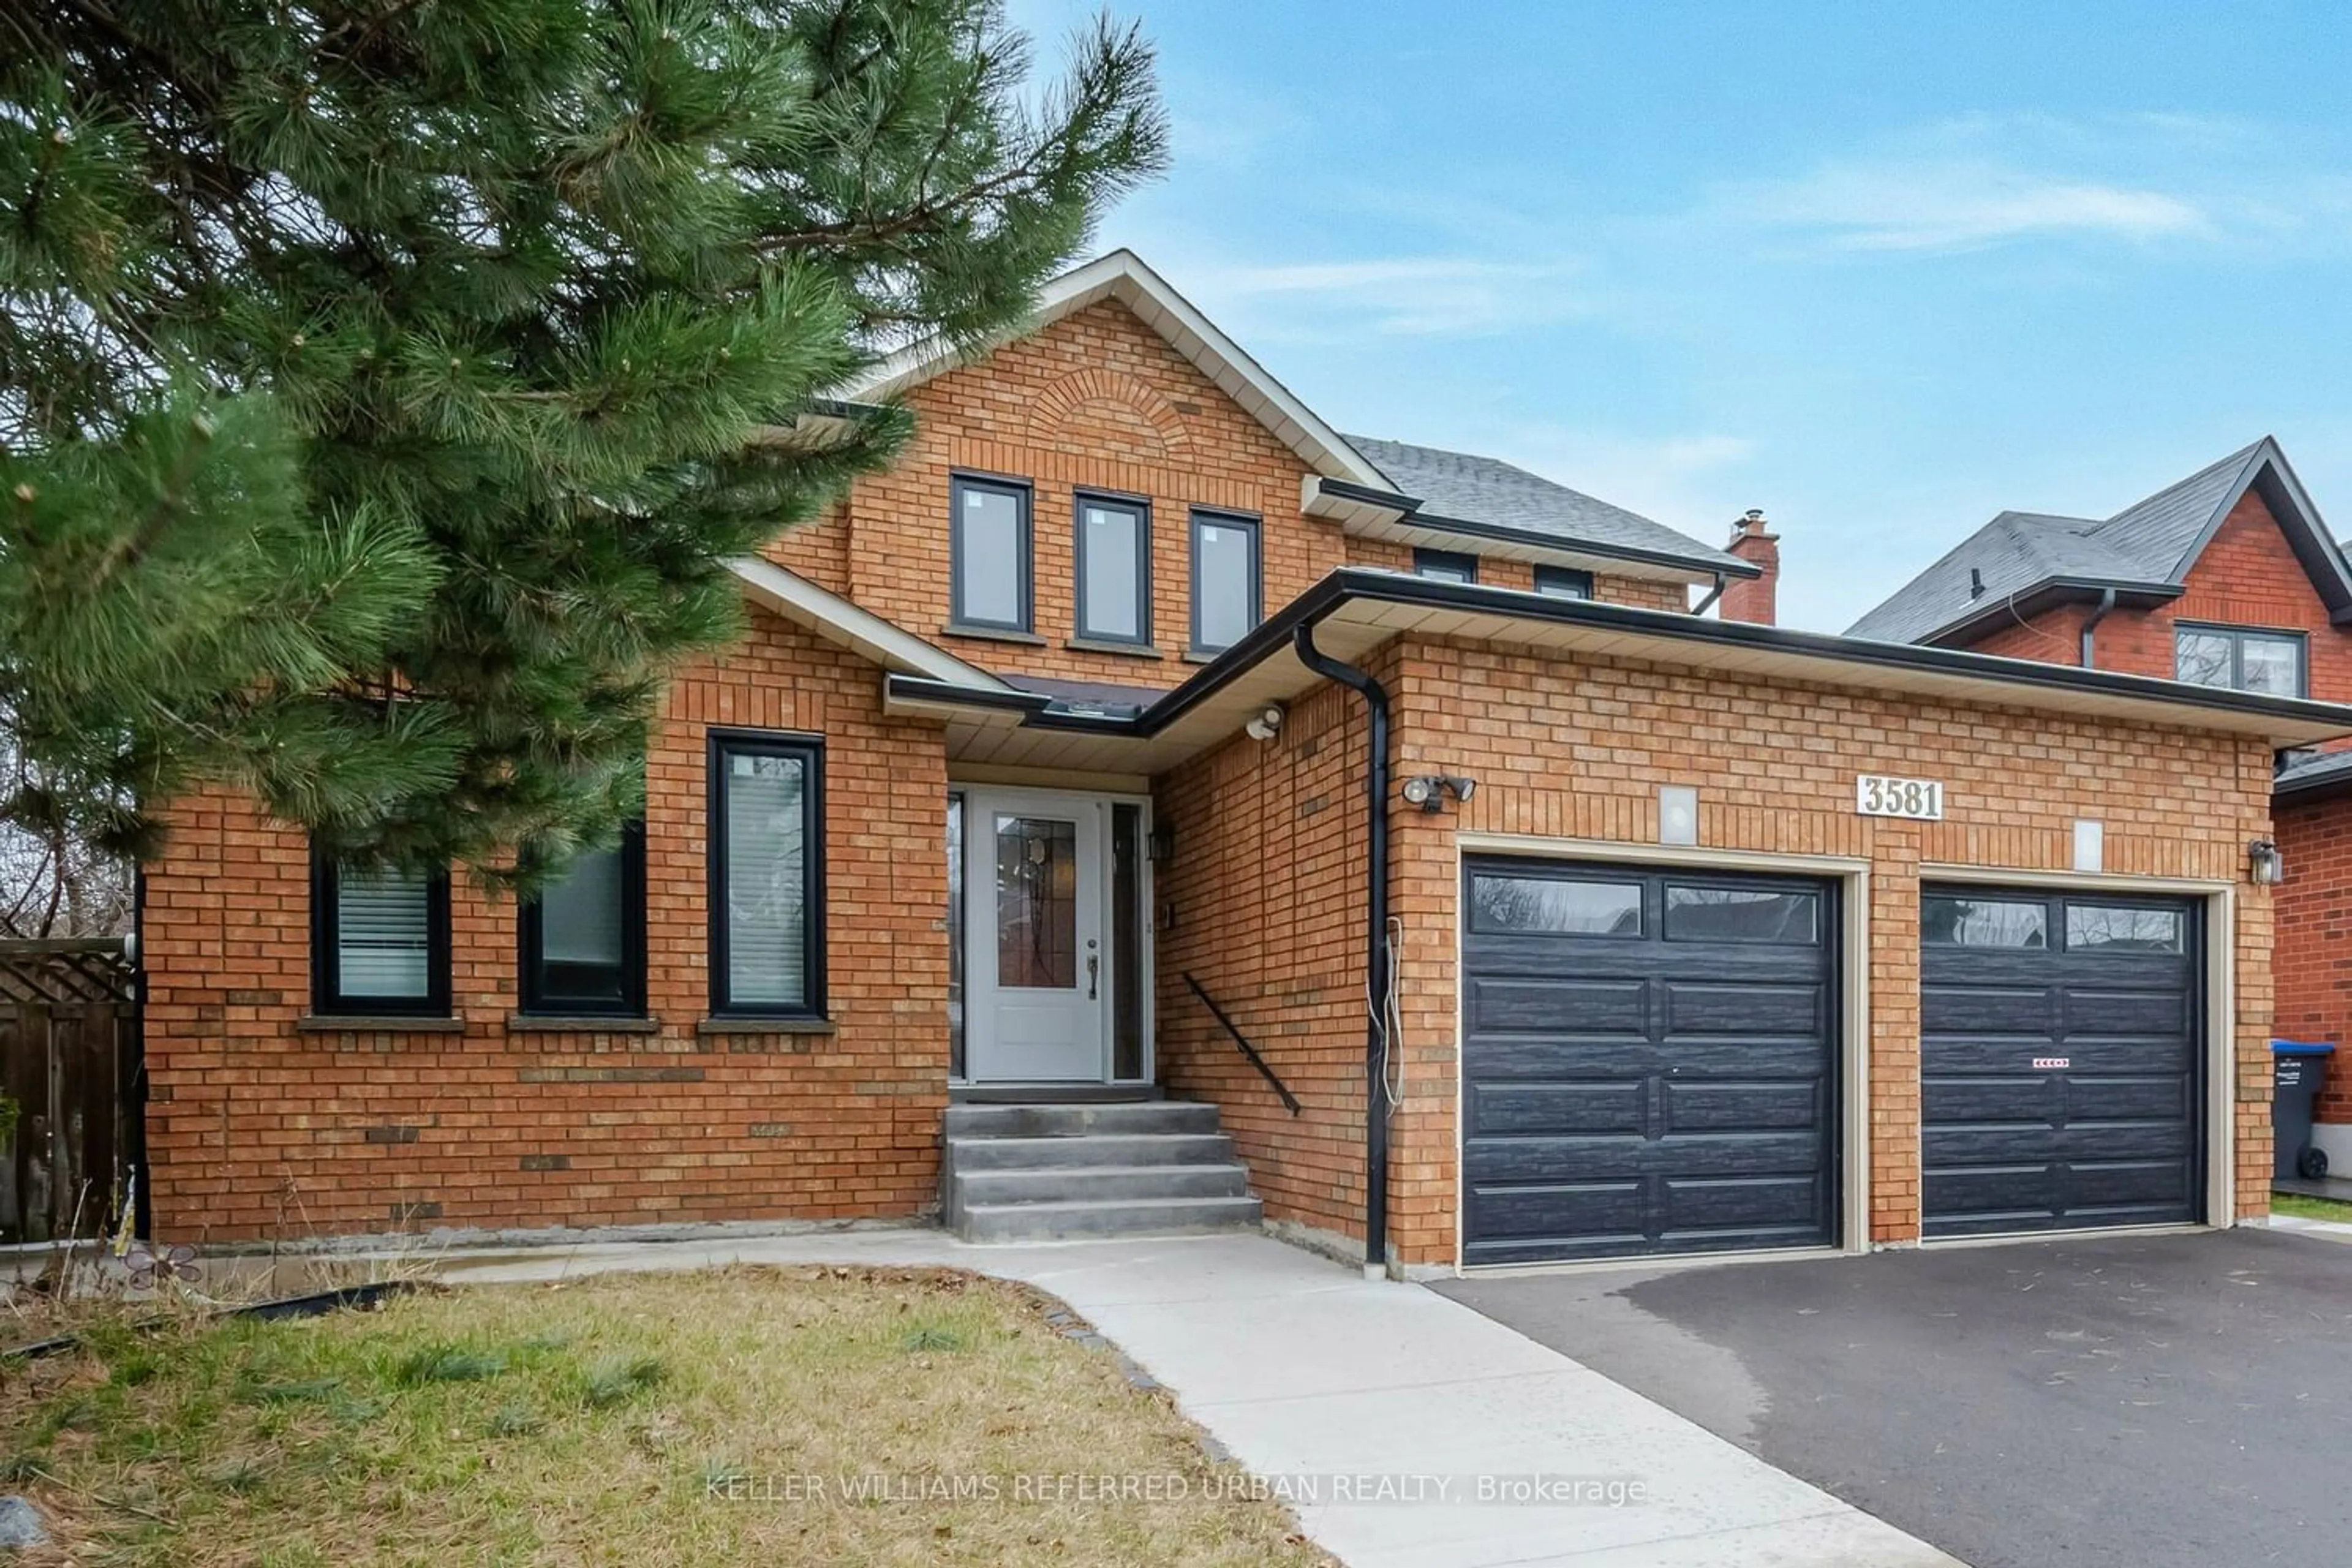 Home with brick exterior material for 3581 Marmac Cres, Mississauga Ontario L5L 5A5